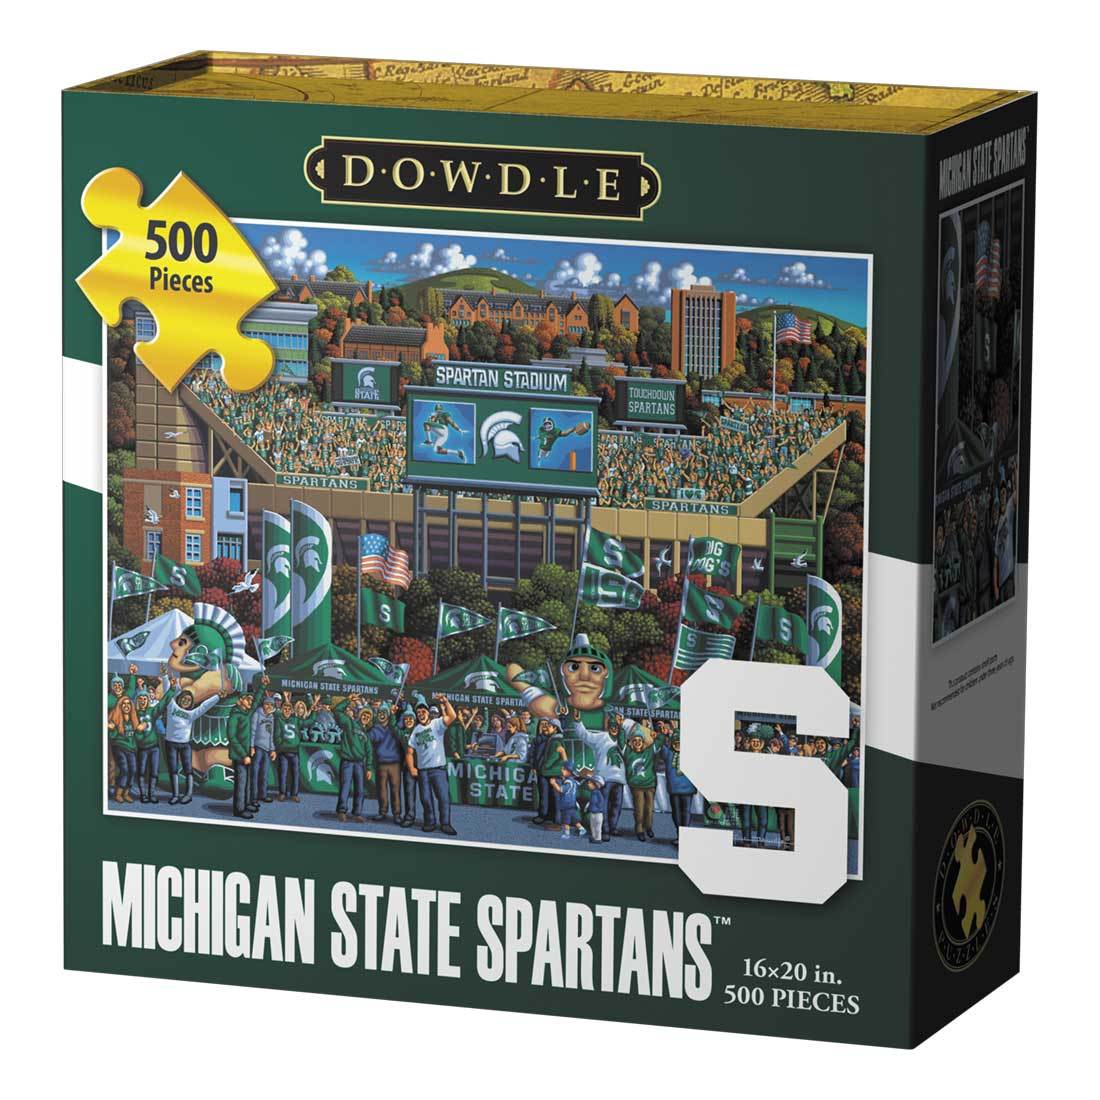 00287 16 X 20 In. Michigan State Spartans Jigsaw Puzzle - 500 Piece